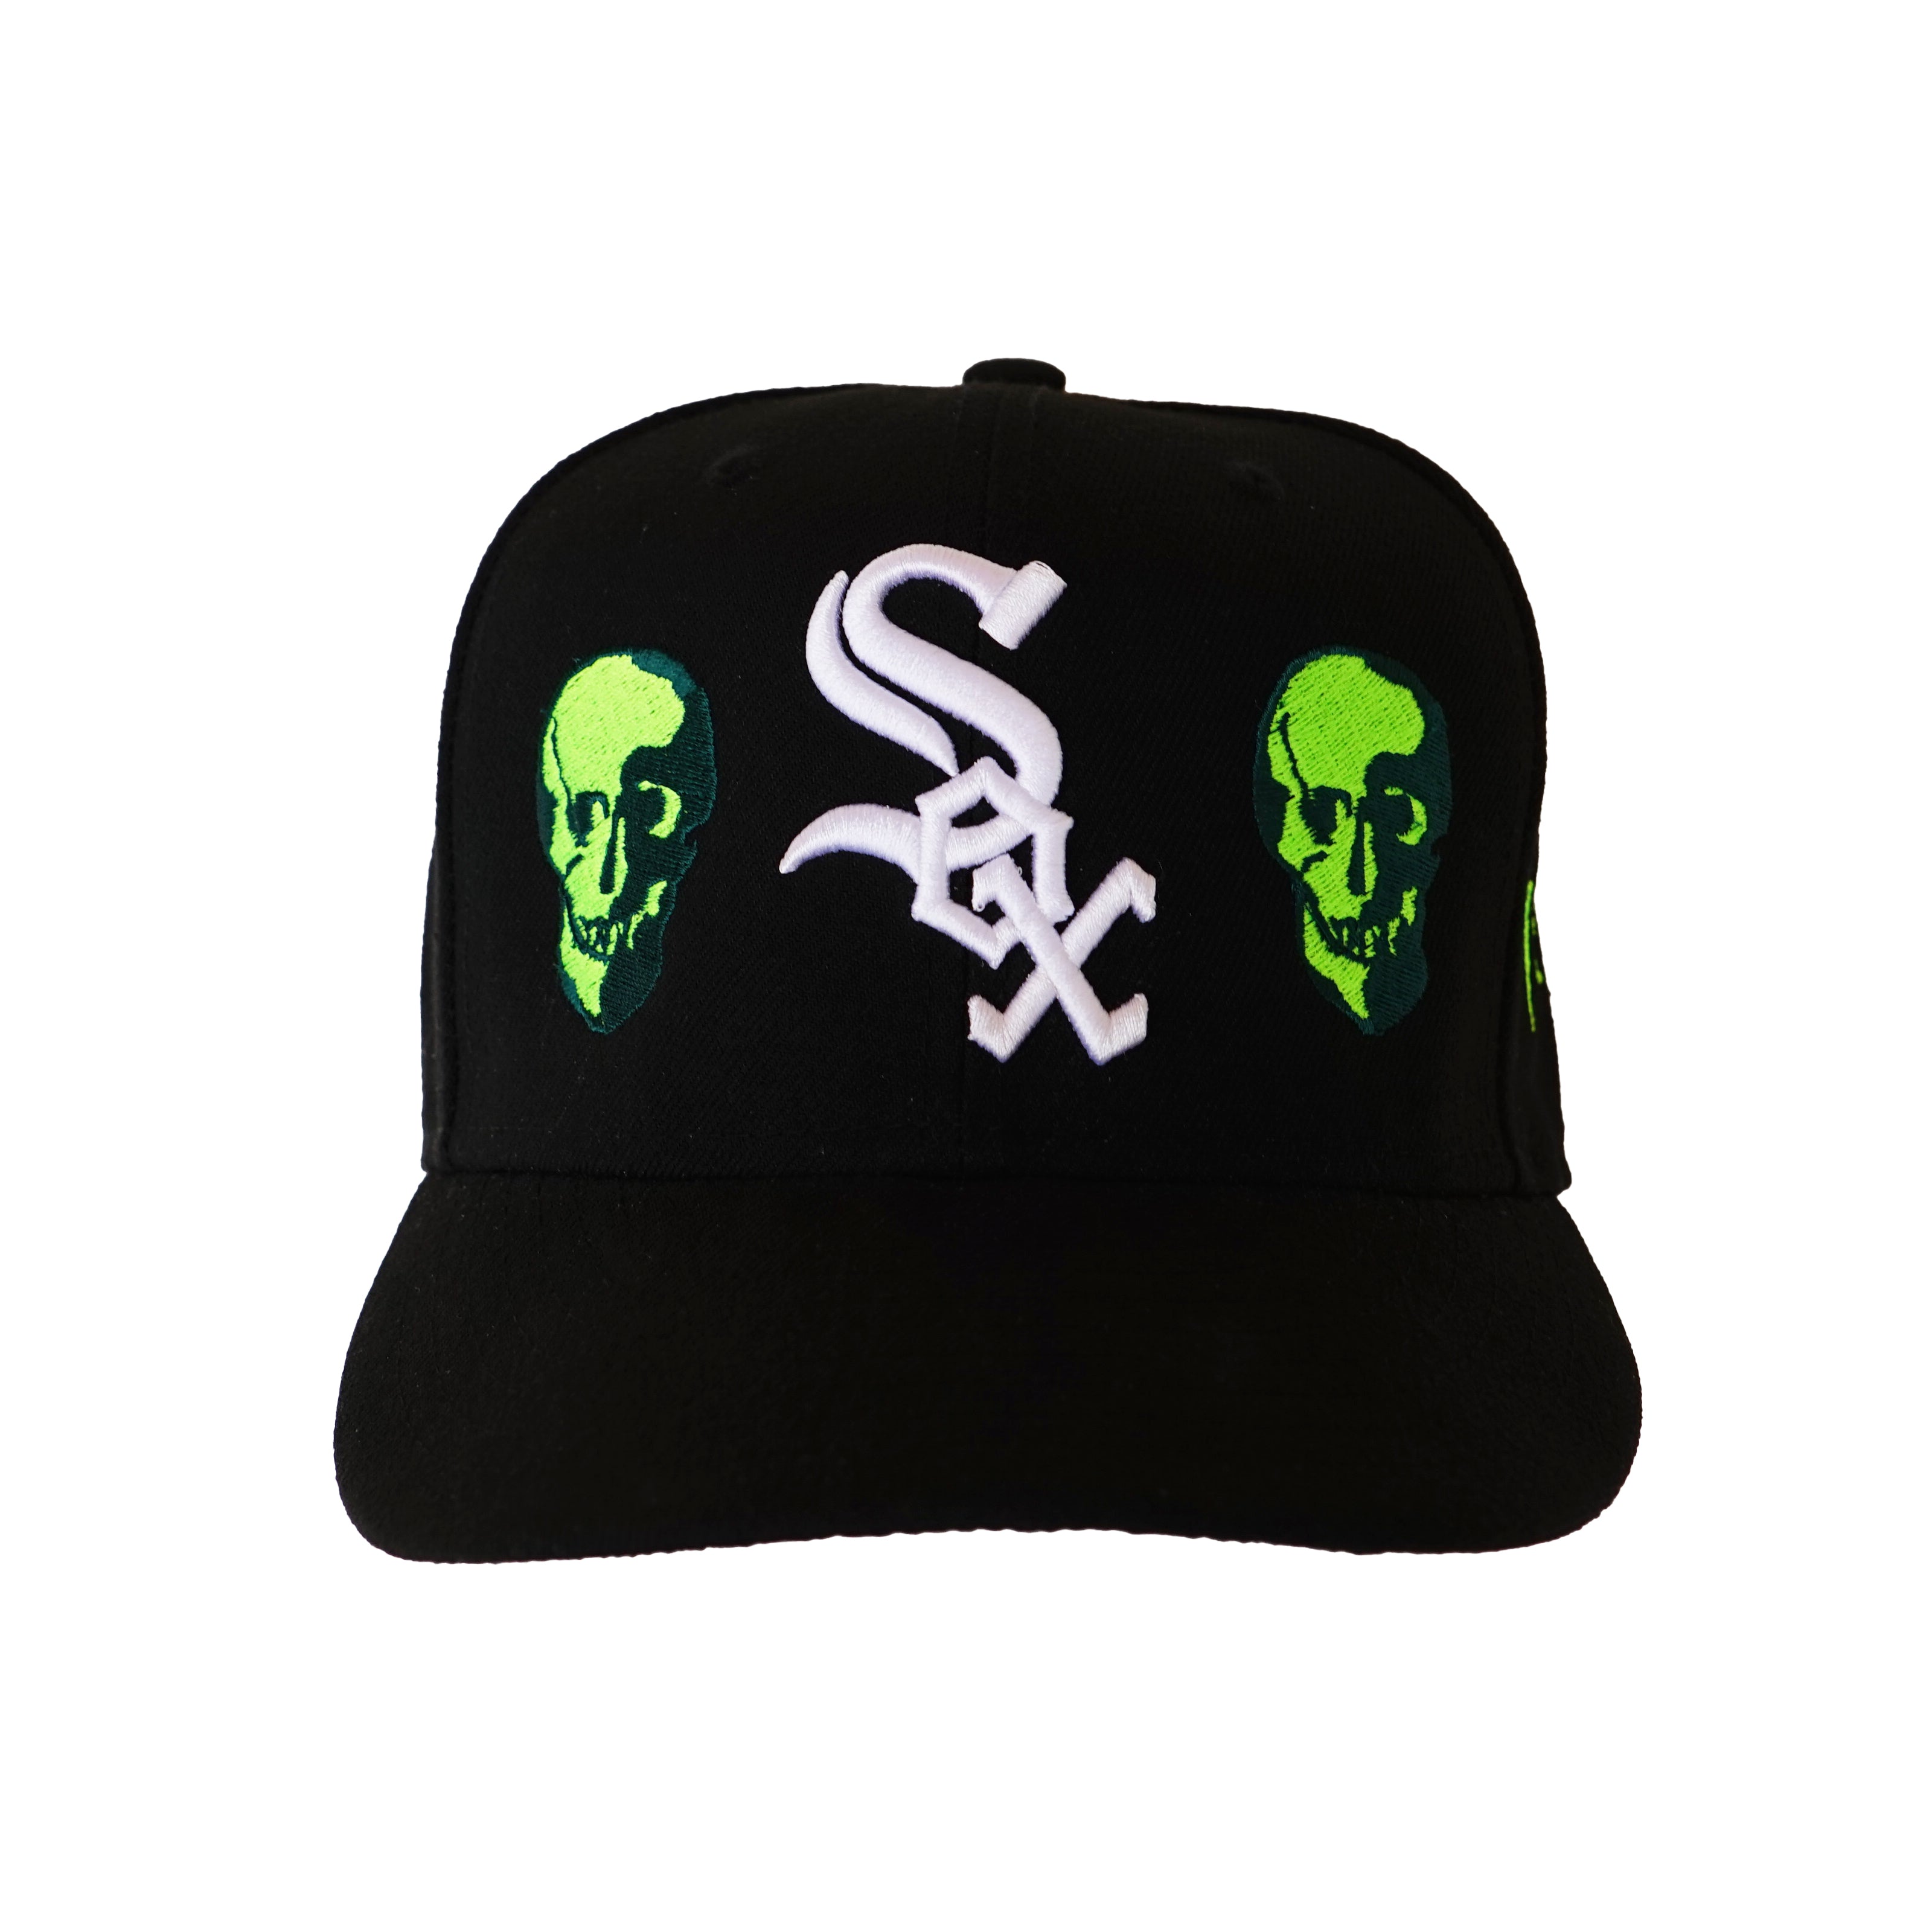 "Skull" White Sox Fitted Cap